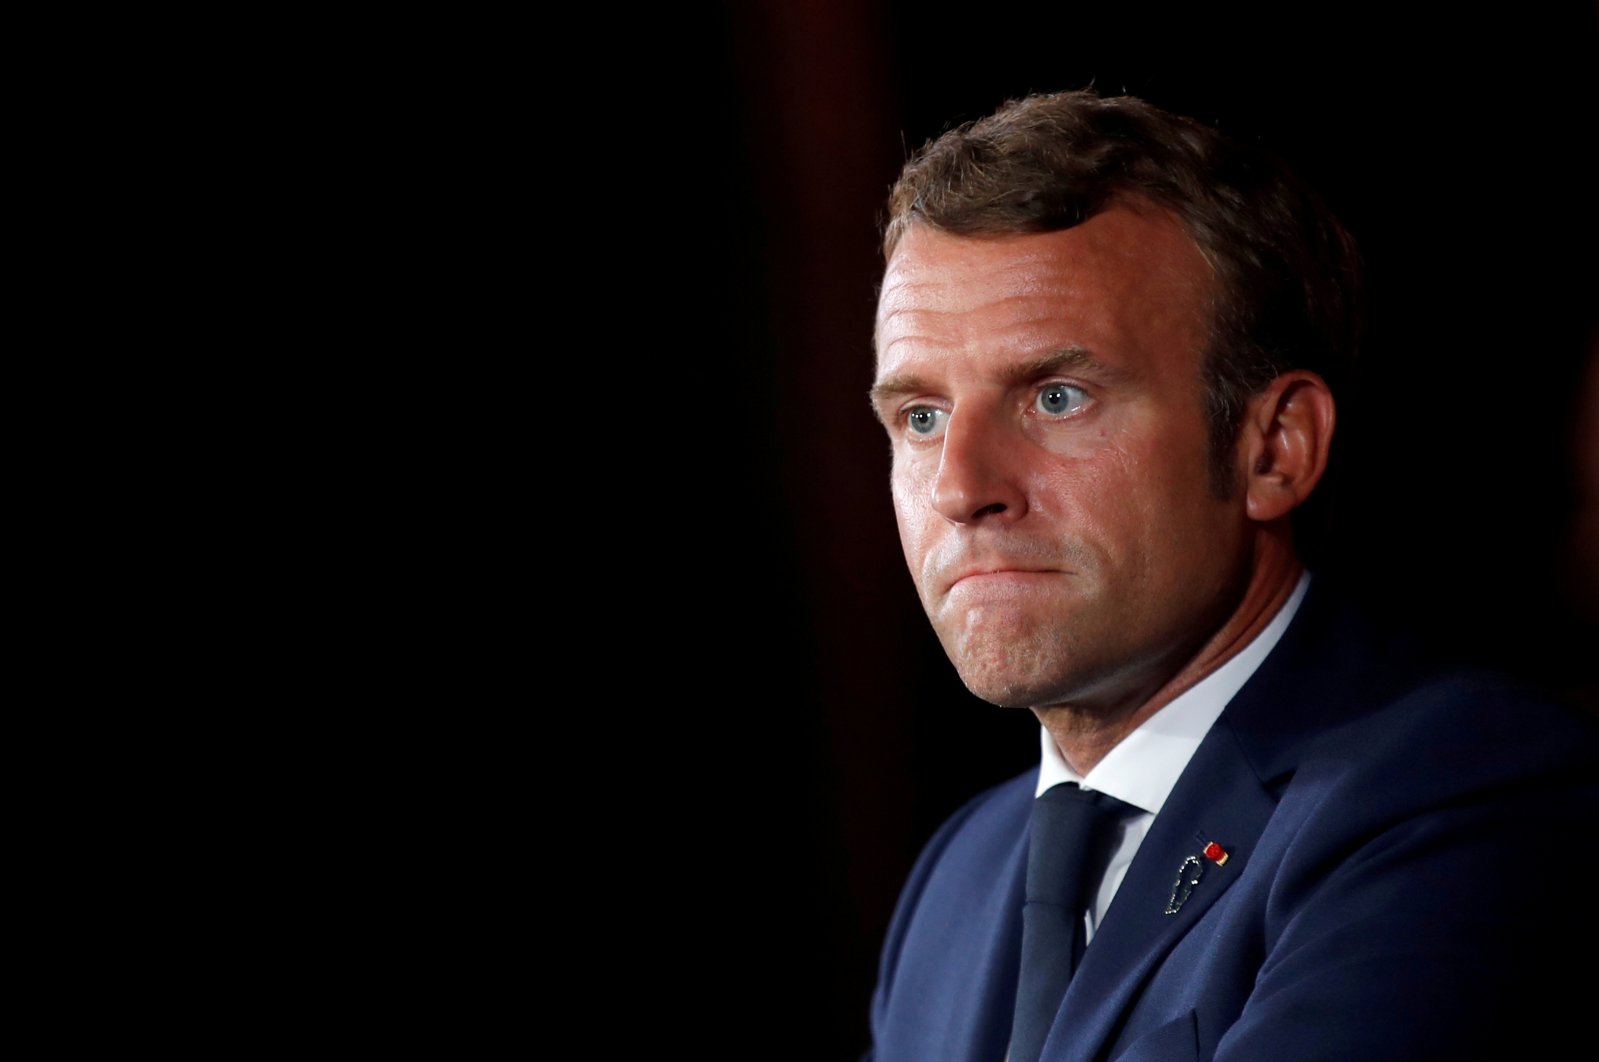 French President Emmanuel Macron looks on as he attends a news conference at the Pine Residence, the official residence of the French ambassador to Lebanon, in Beirut, Lebanon September 1, 2020. (REUTERS Photo)